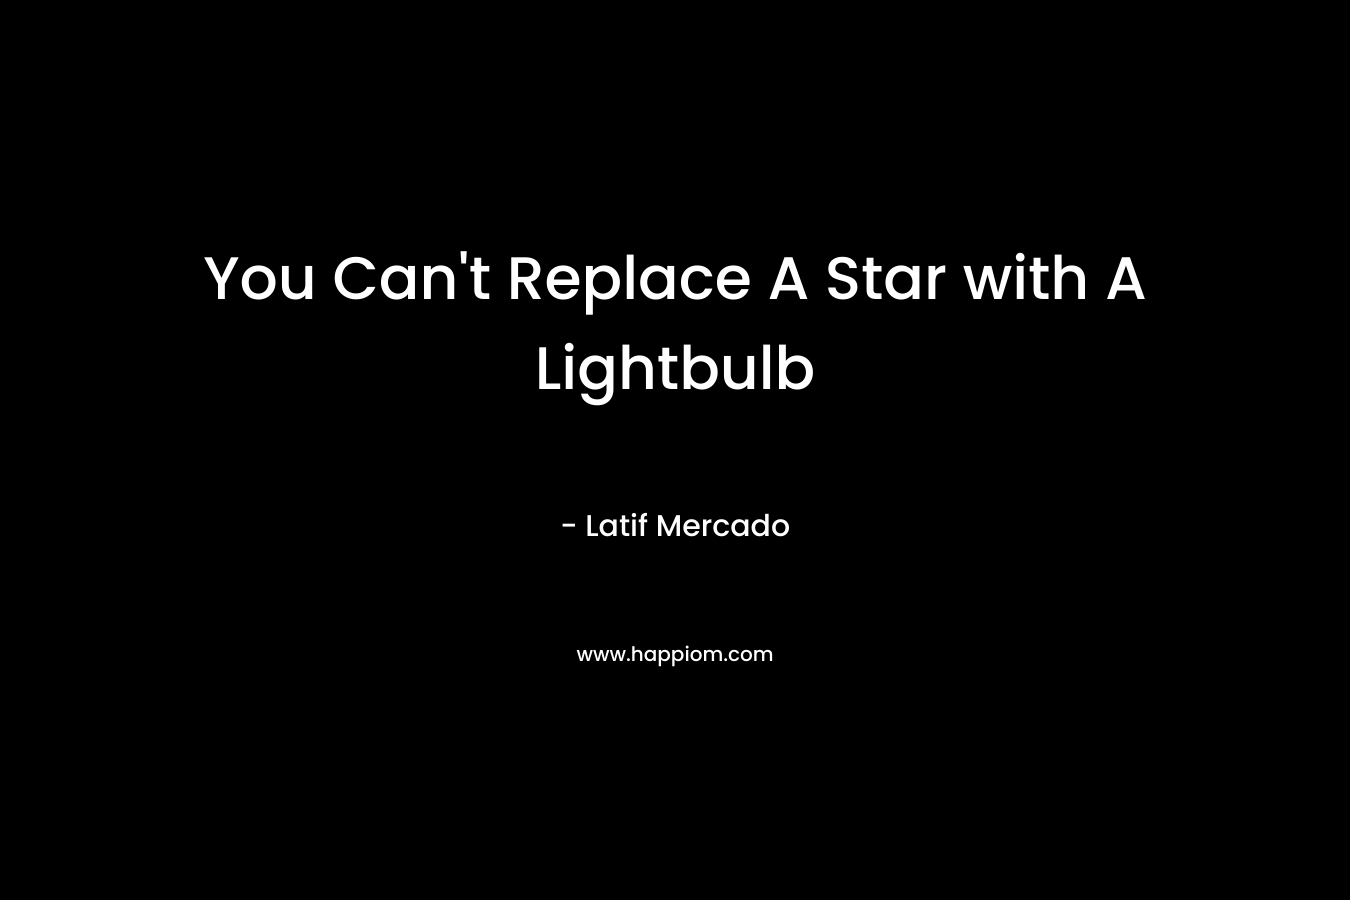 You Can’t Replace A Star with A Lightbulb – Latif Mercado